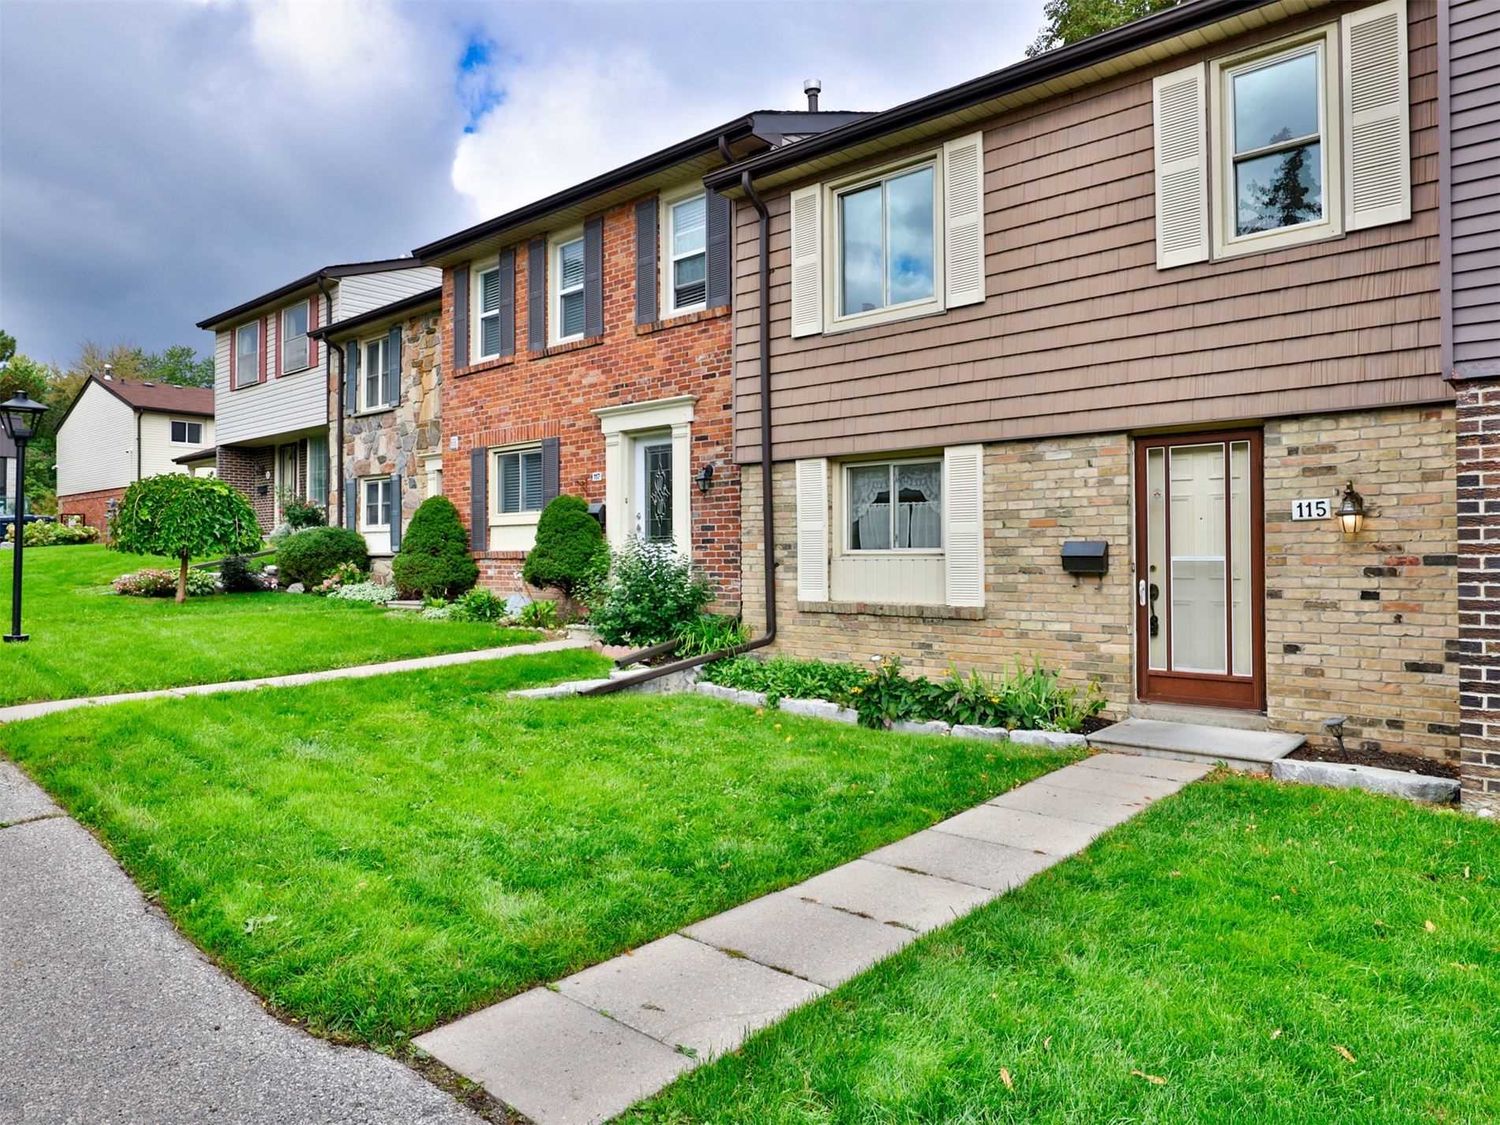 1-161 Palmdale Drive. Palmdale Drive Townhomes is located in  Scarborough, Toronto - image #1 of 3